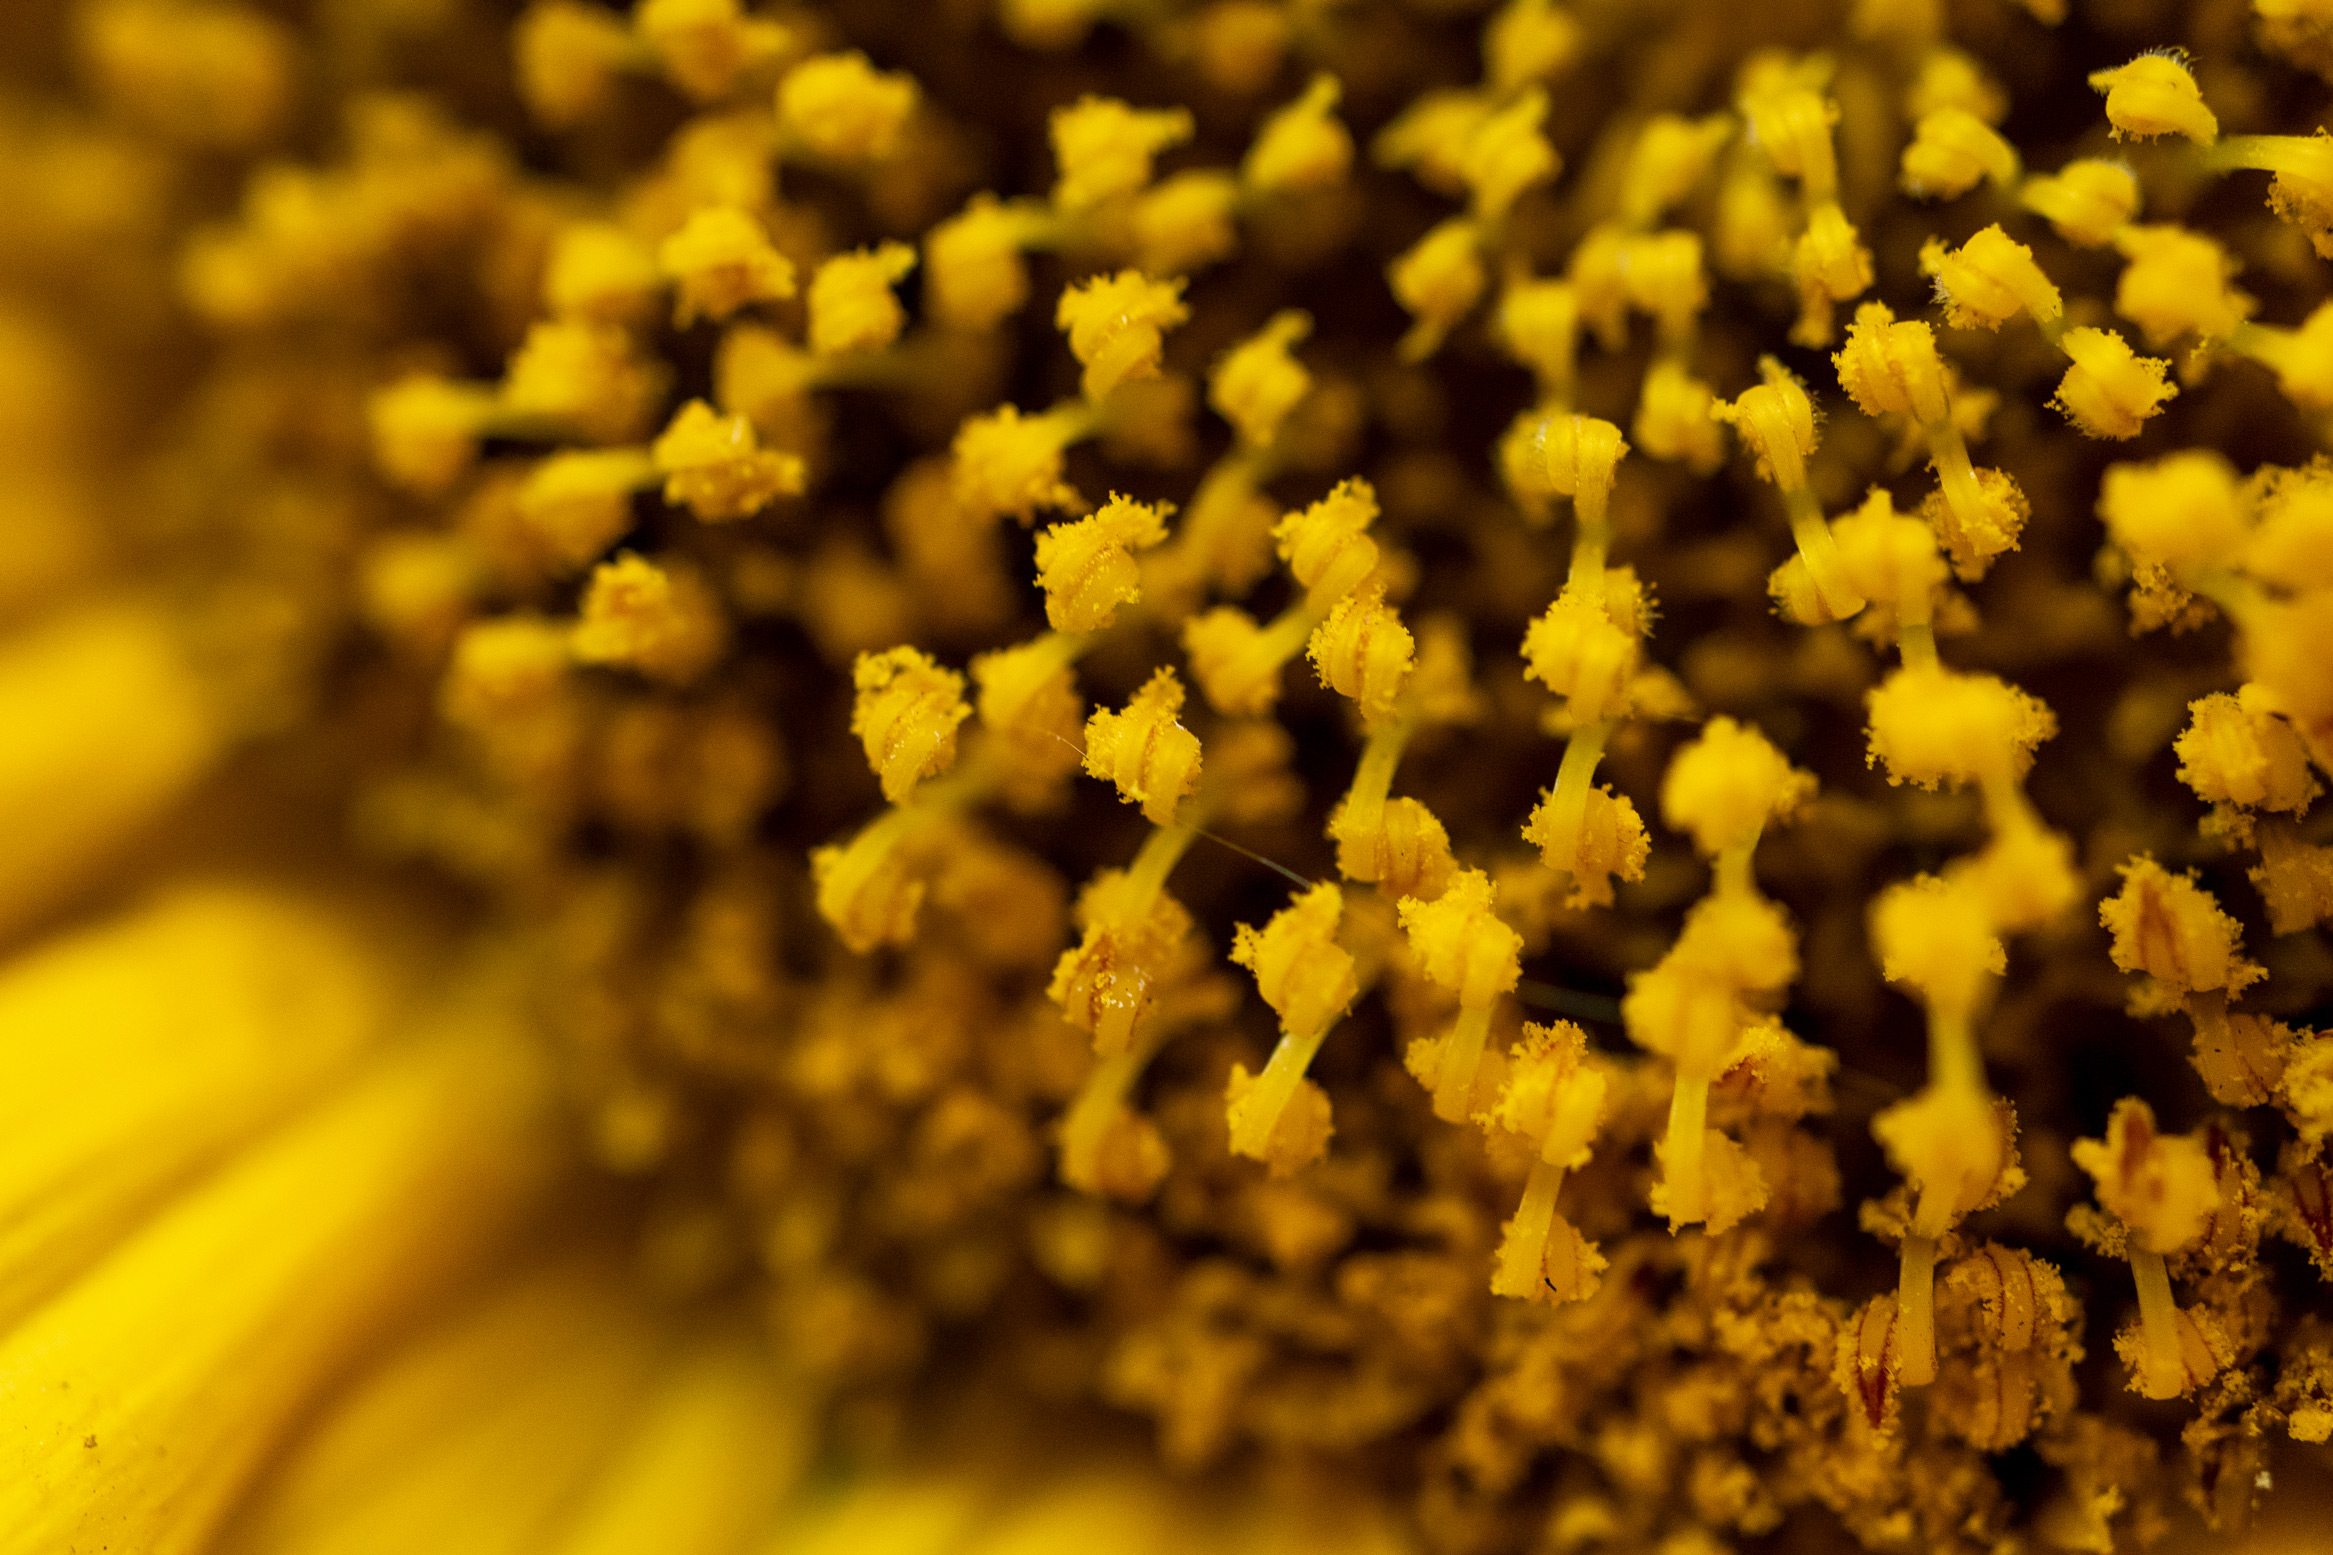 Macro shot of the middle section of a sunflower